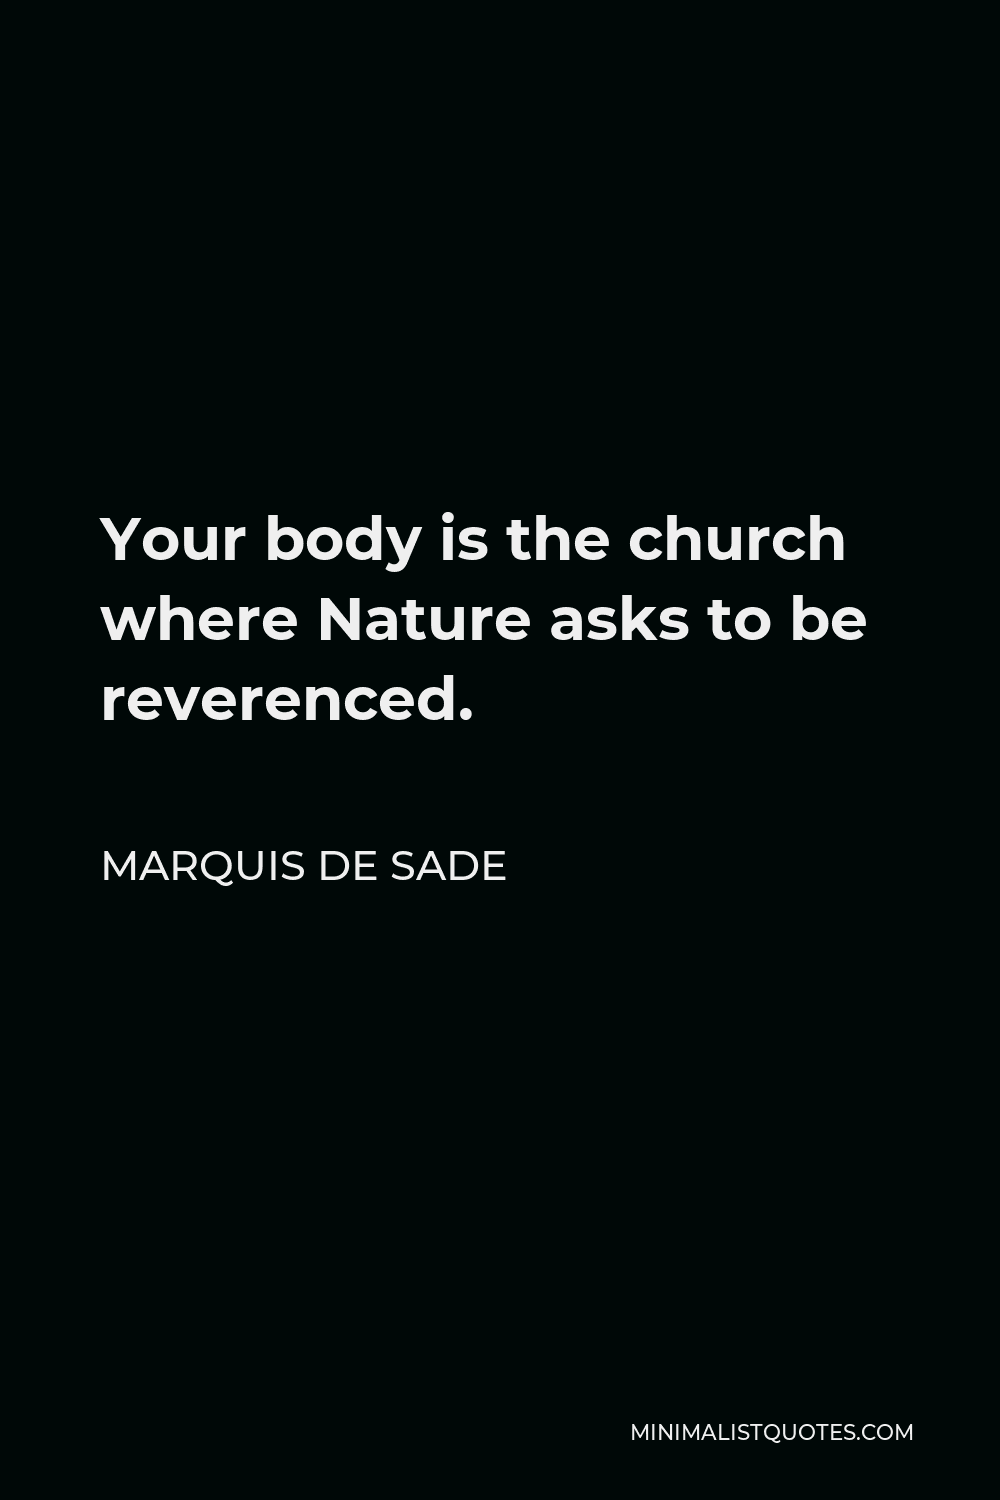 Marquis de Sade Quote - Your body is the church where Nature asks to be reverenced.